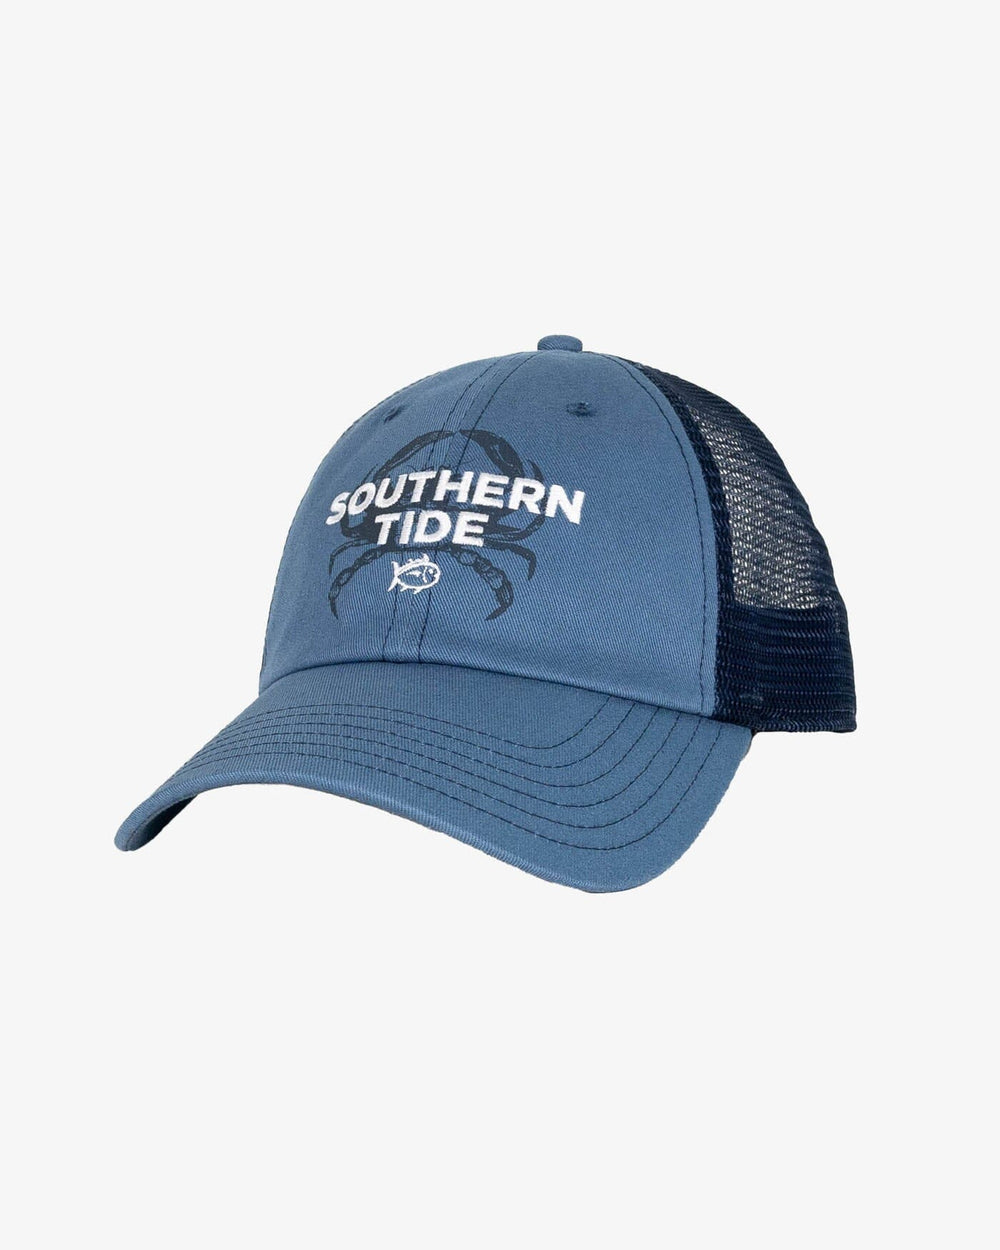 The front view of the Southern Tide Southern Tide Crab Print Trucker by Southern Tide - Blue